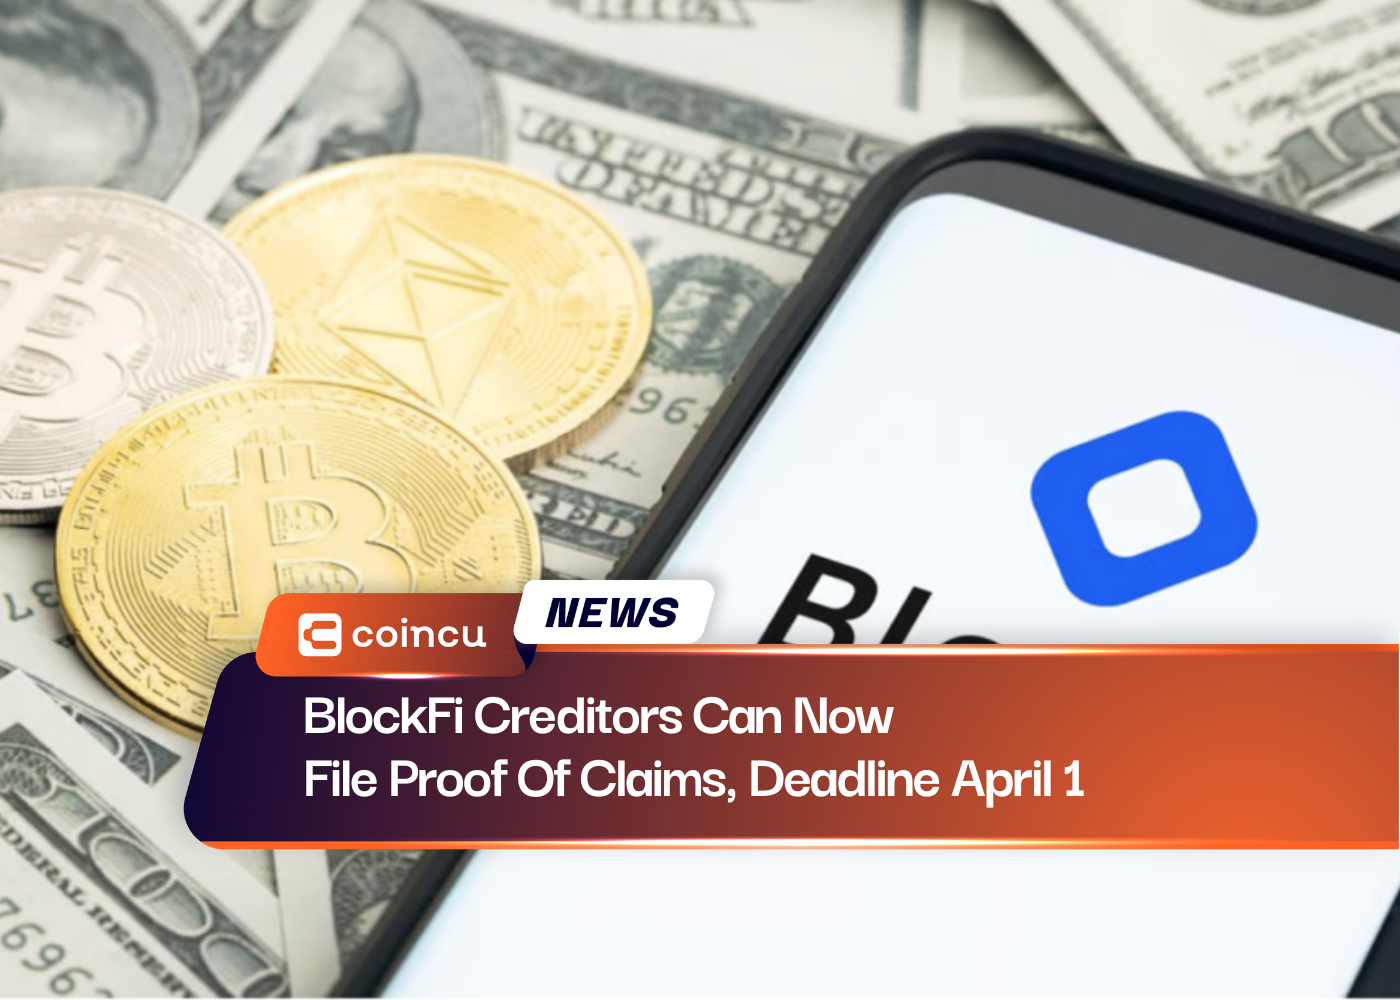 BlockFi Creditors Can Now File Proof Of Claims, Deadline April 1